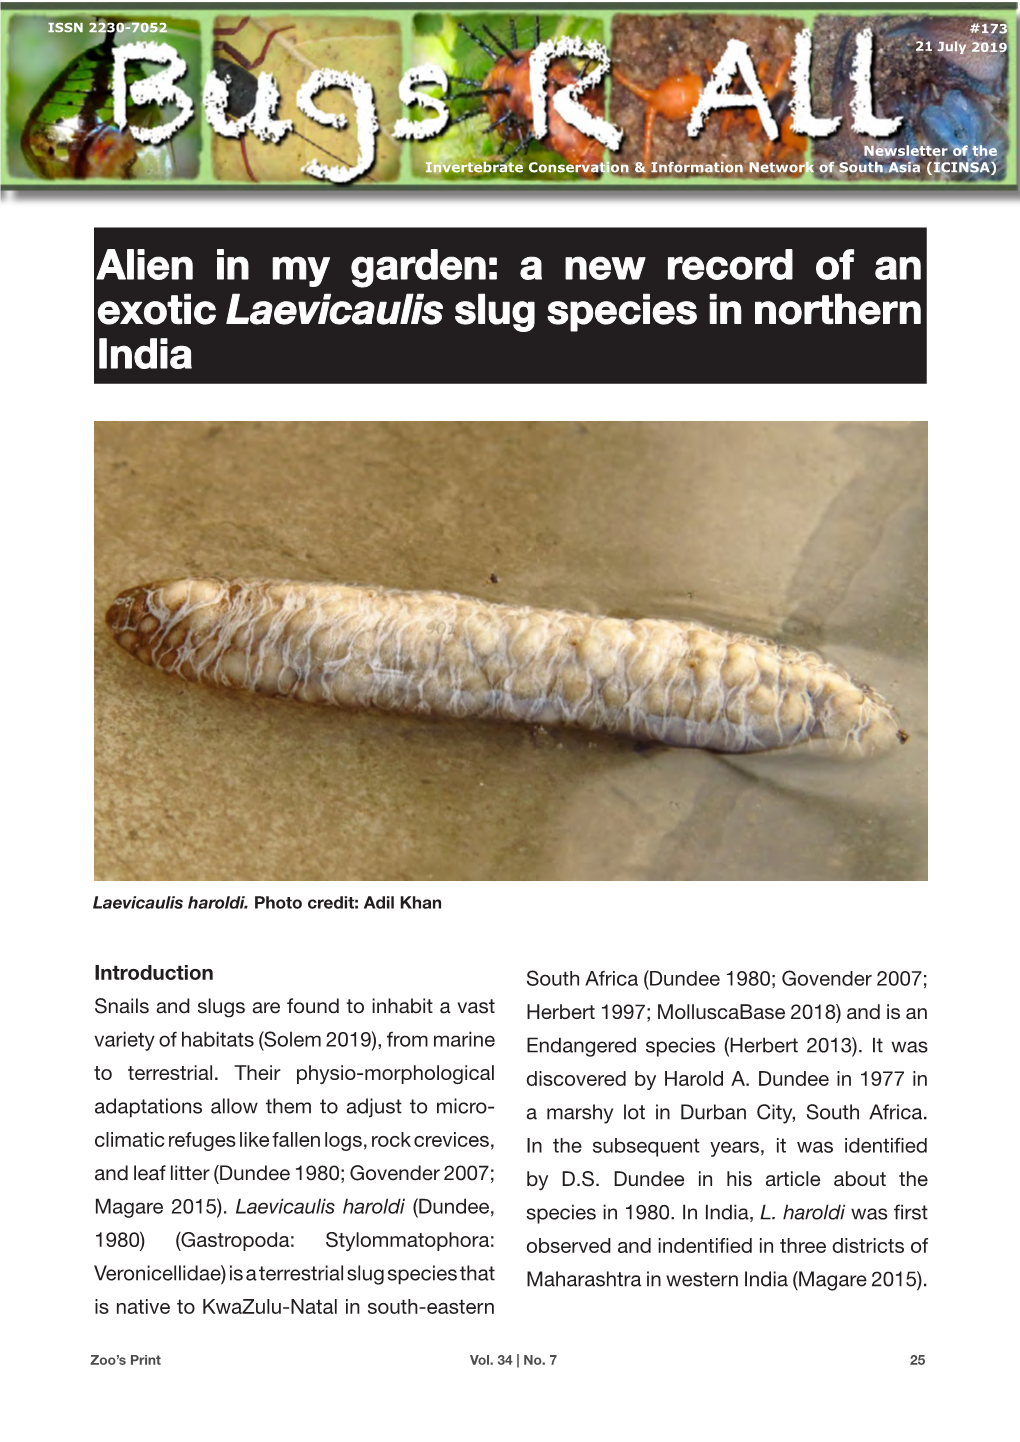 A New Record of an Exotic Laevicaulis Slug Species in Northern India